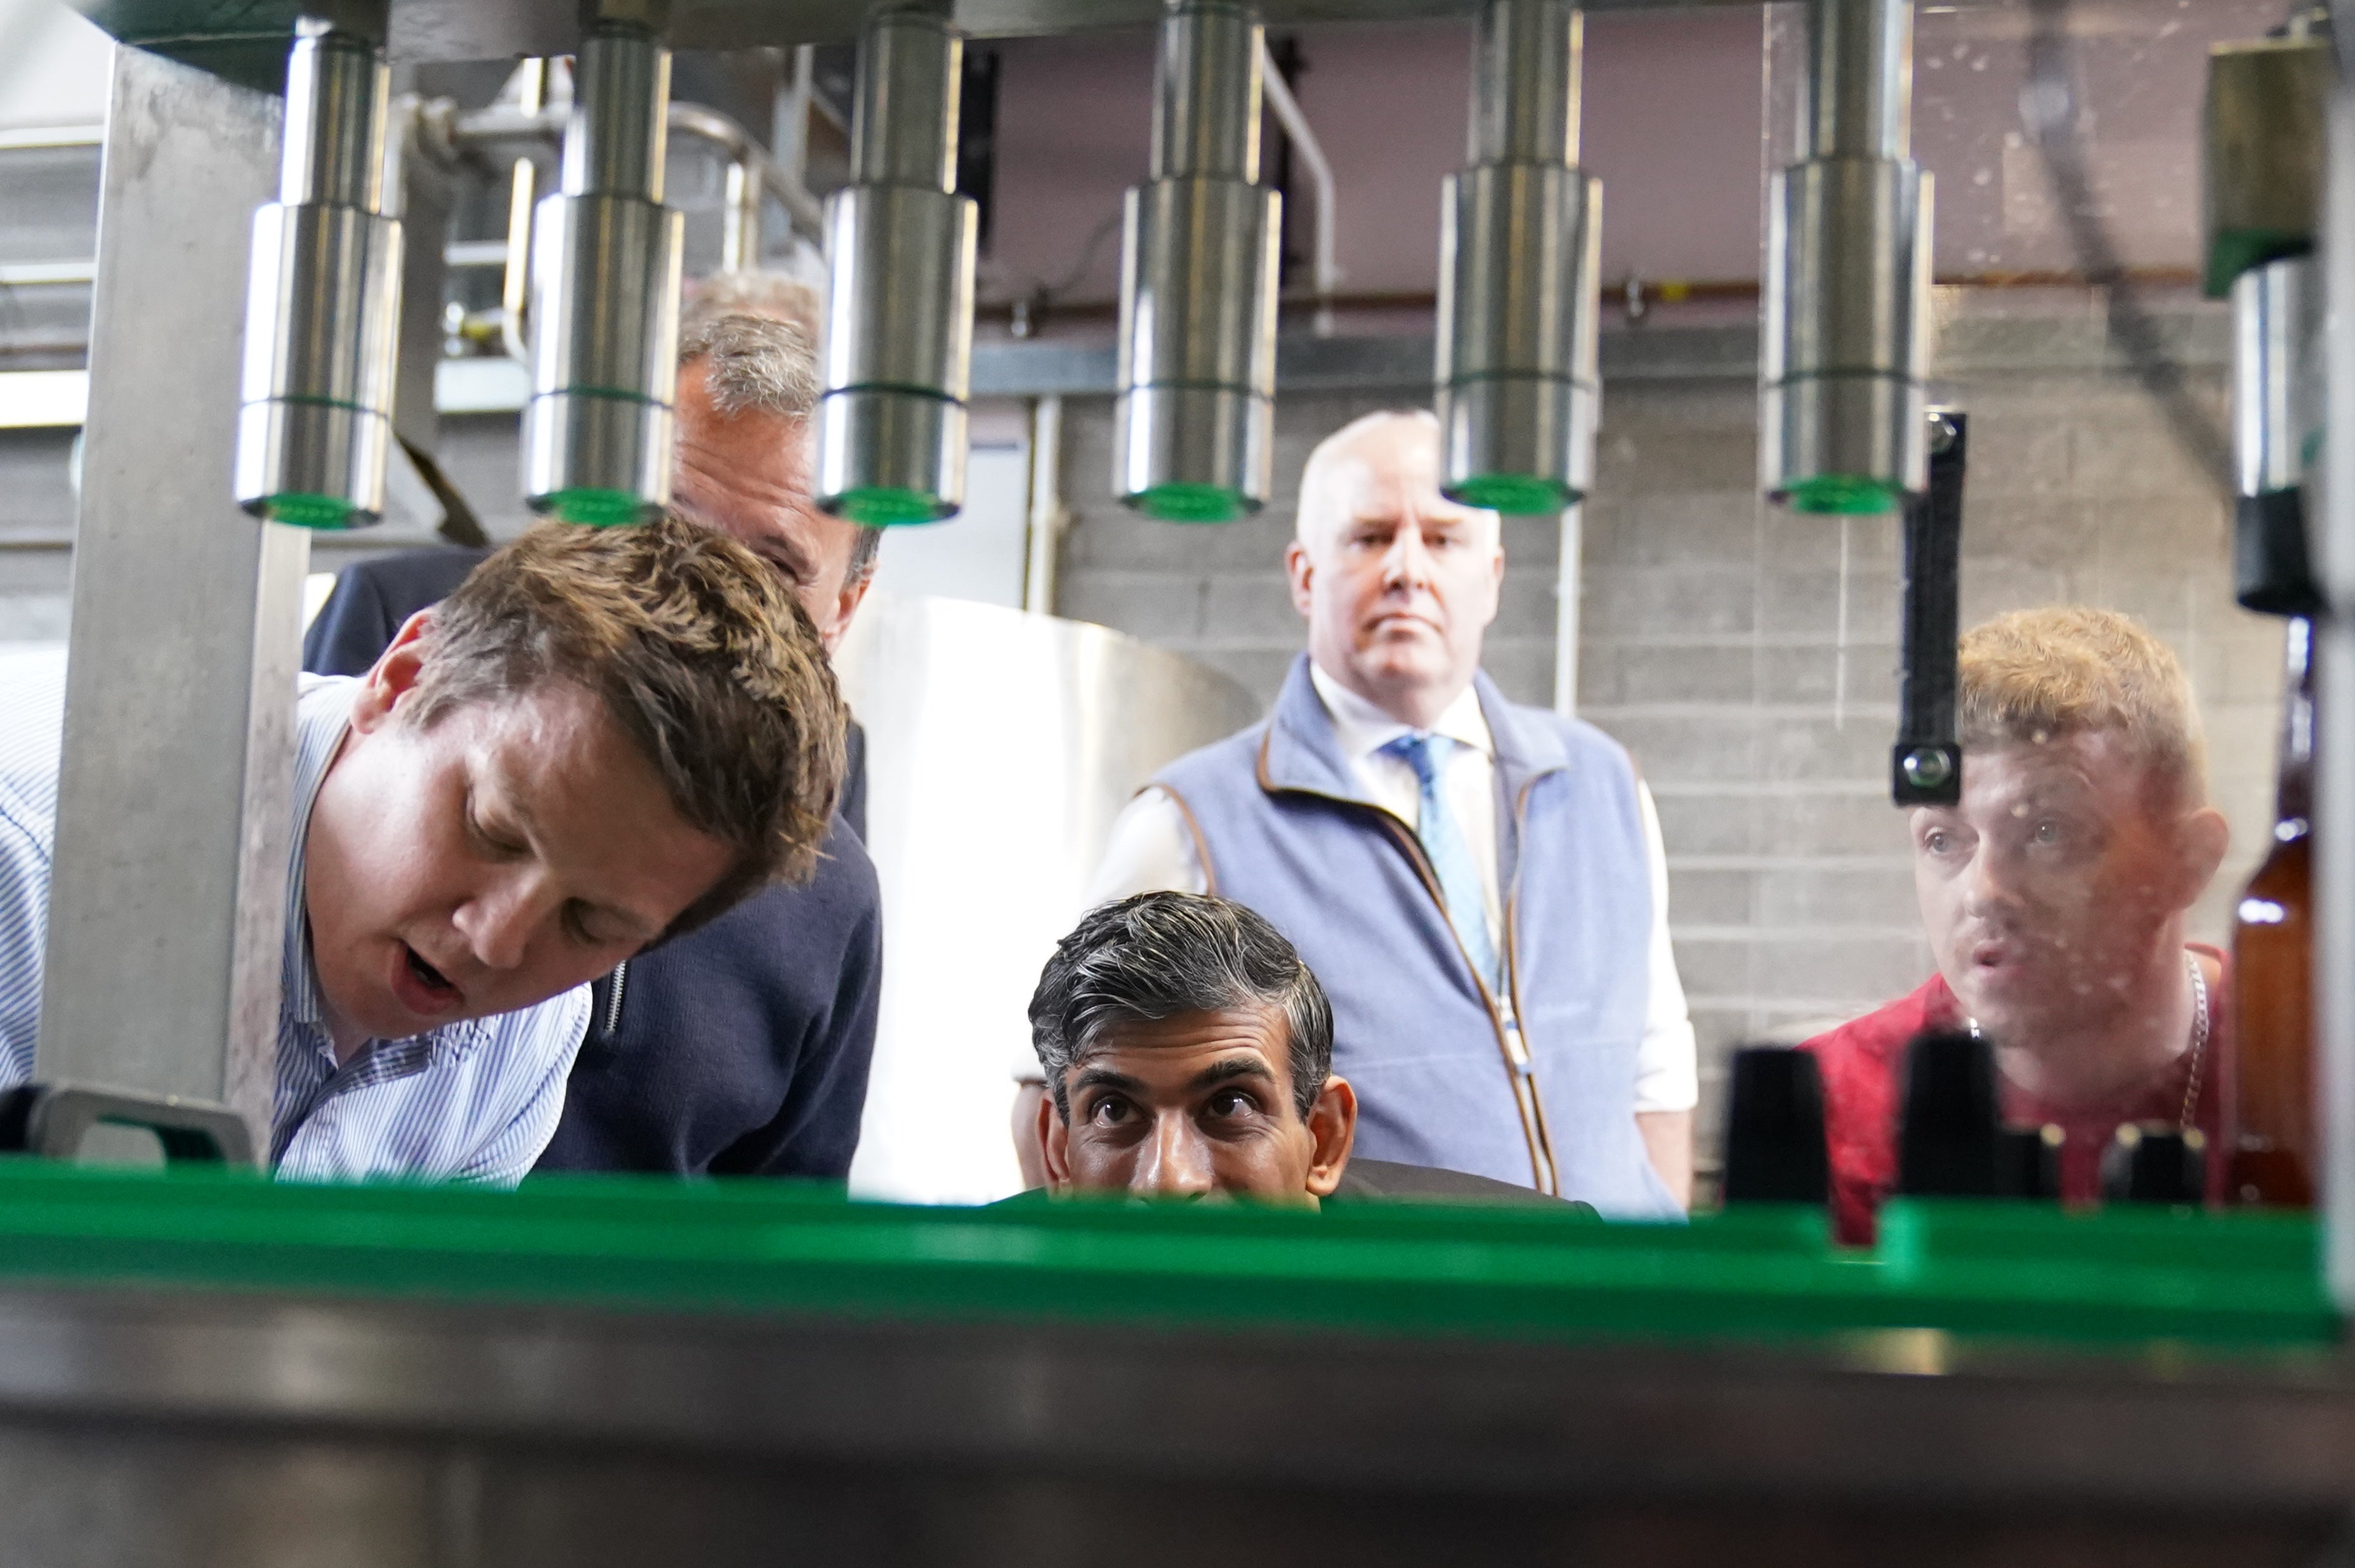 Rishi Sunak visited a brewery in South Wales, where he asked voters if they were looking forward to the Euros